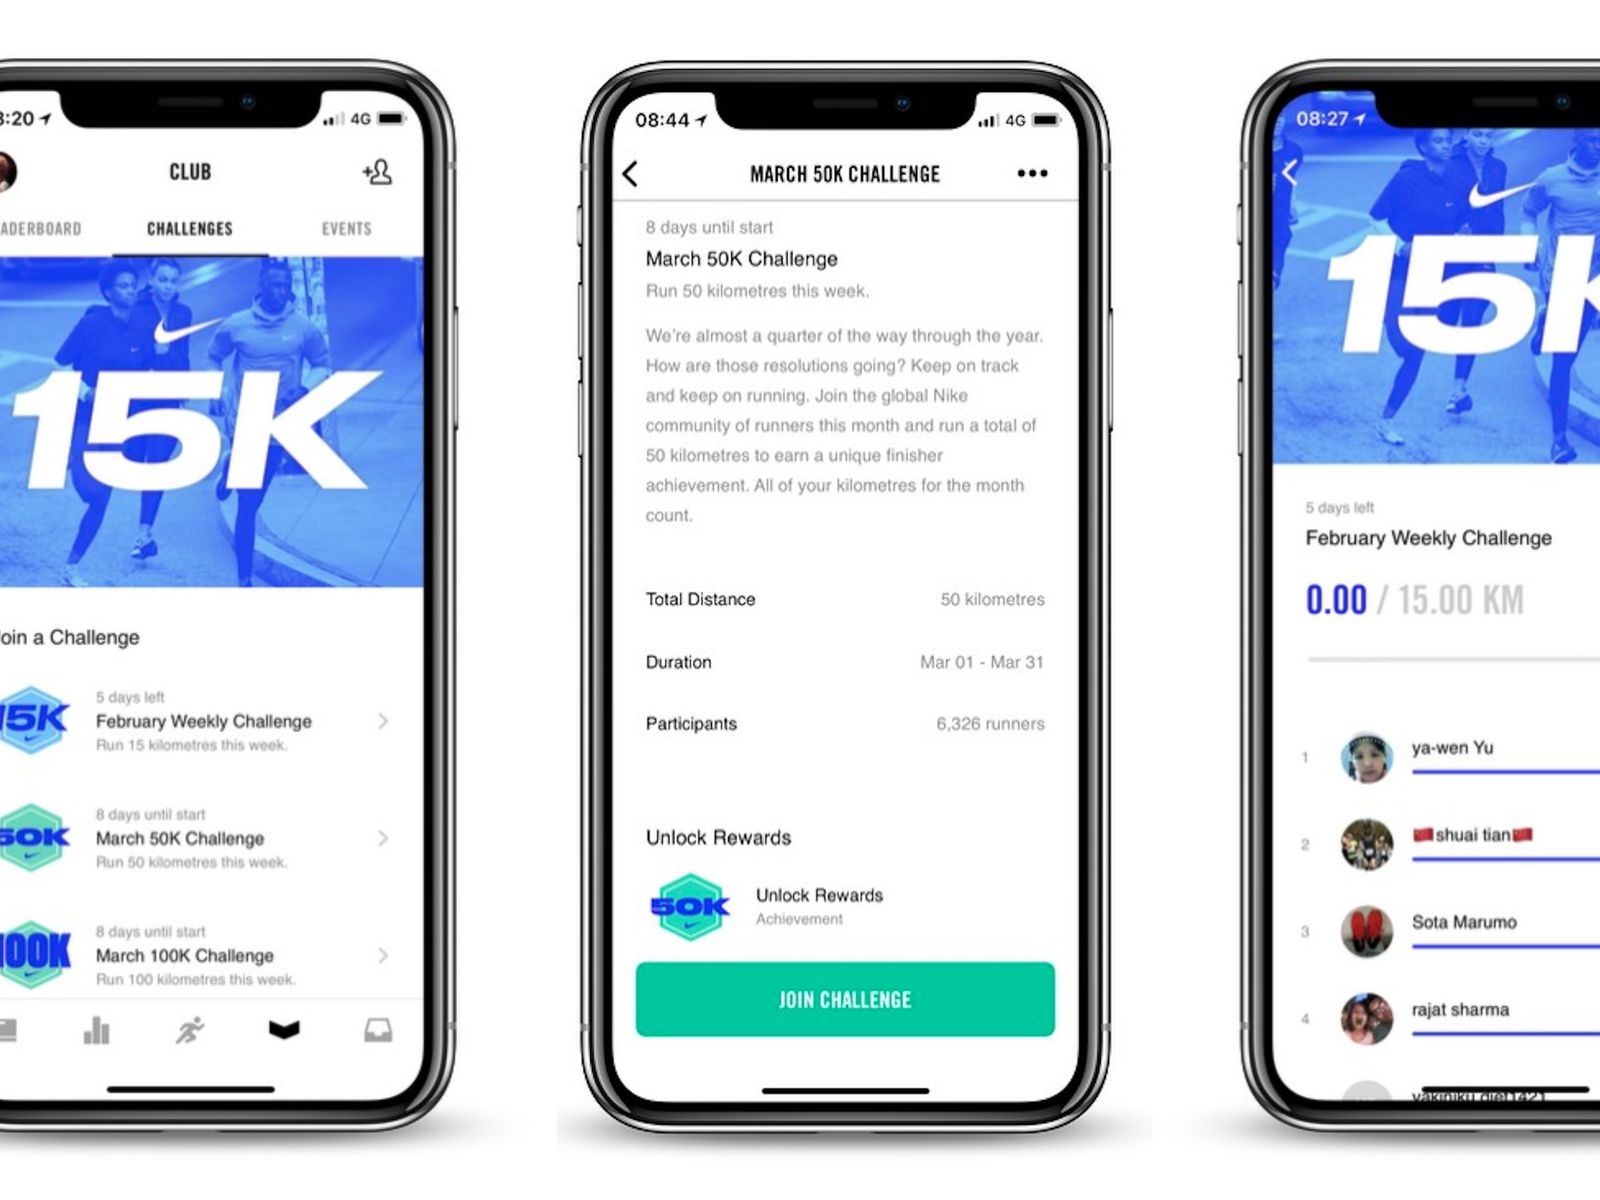 Club iOS App With New Weekly Challenges - MacRumors